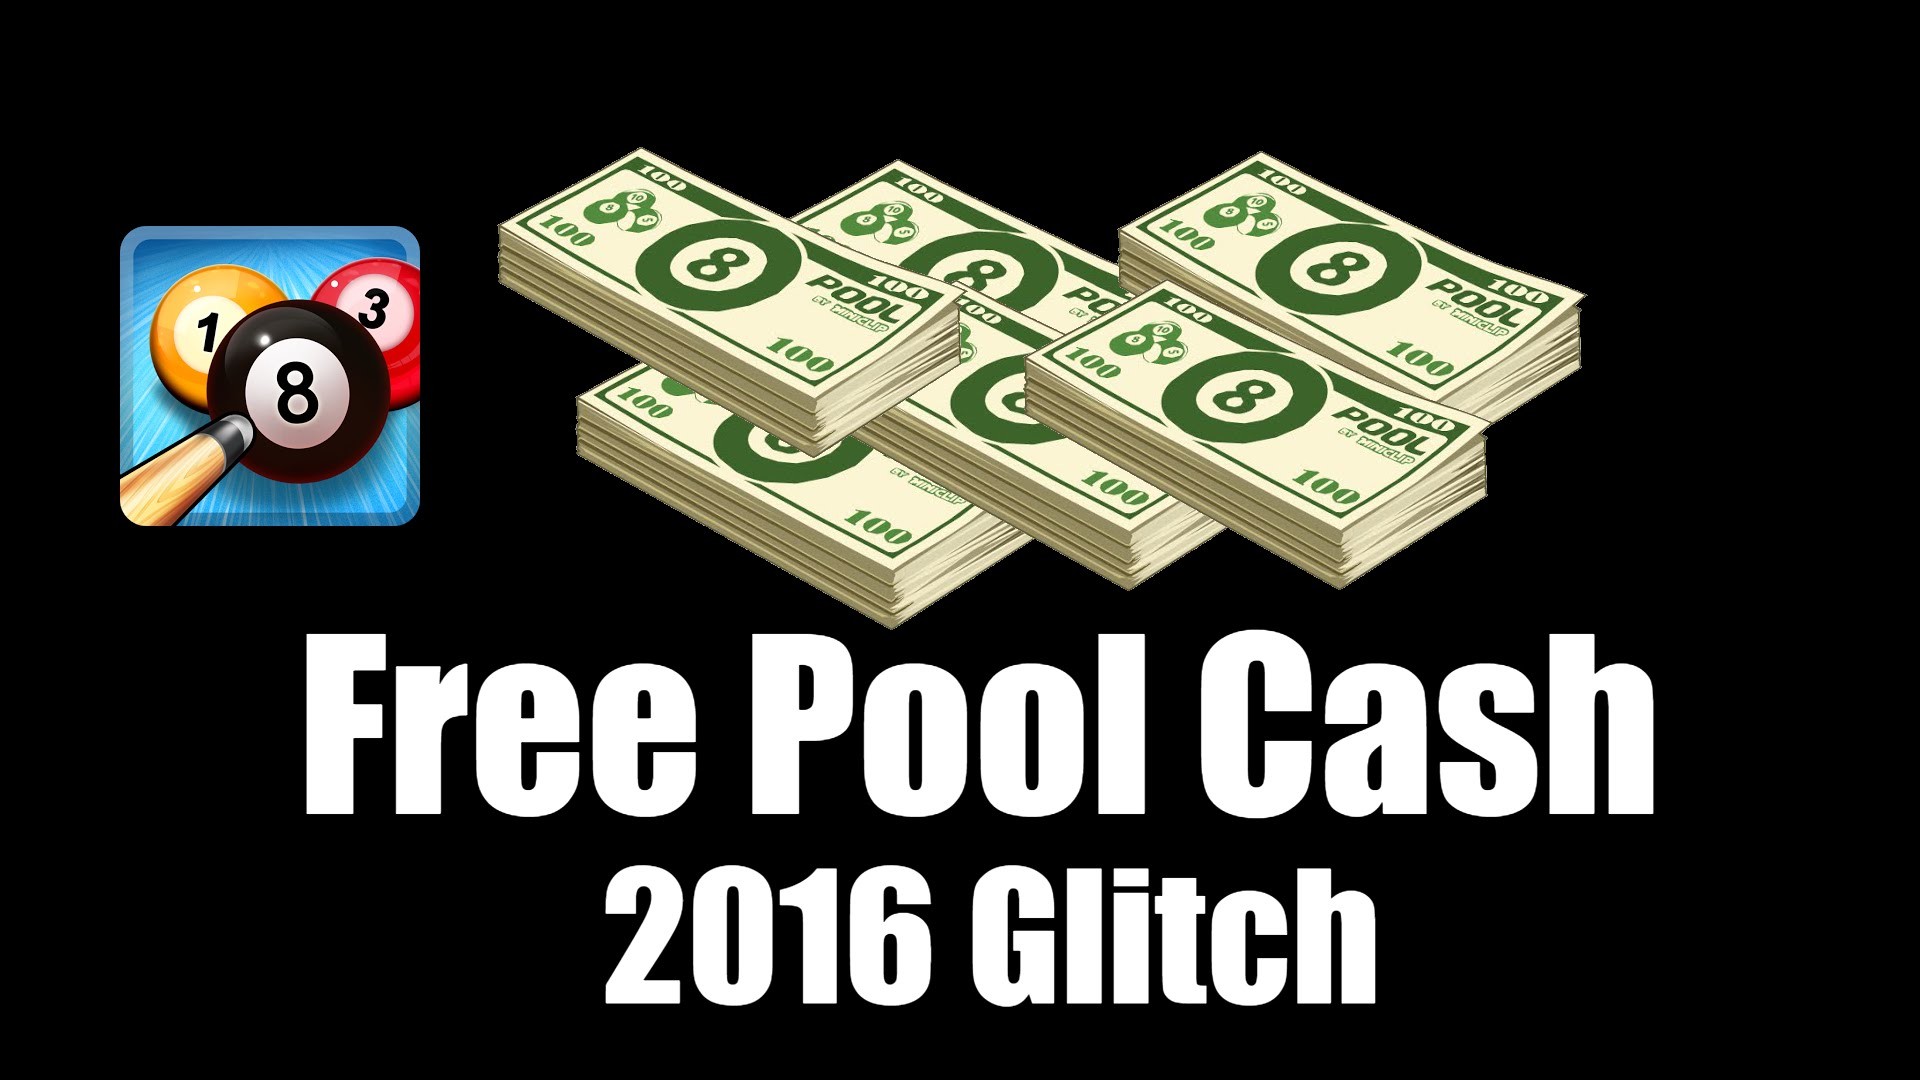 1920x1080 8 Ball Pool Free Unlimited Pool Cash Glitch Aug 2016 (Limited) v3.7.2  (Patched) - YouTube